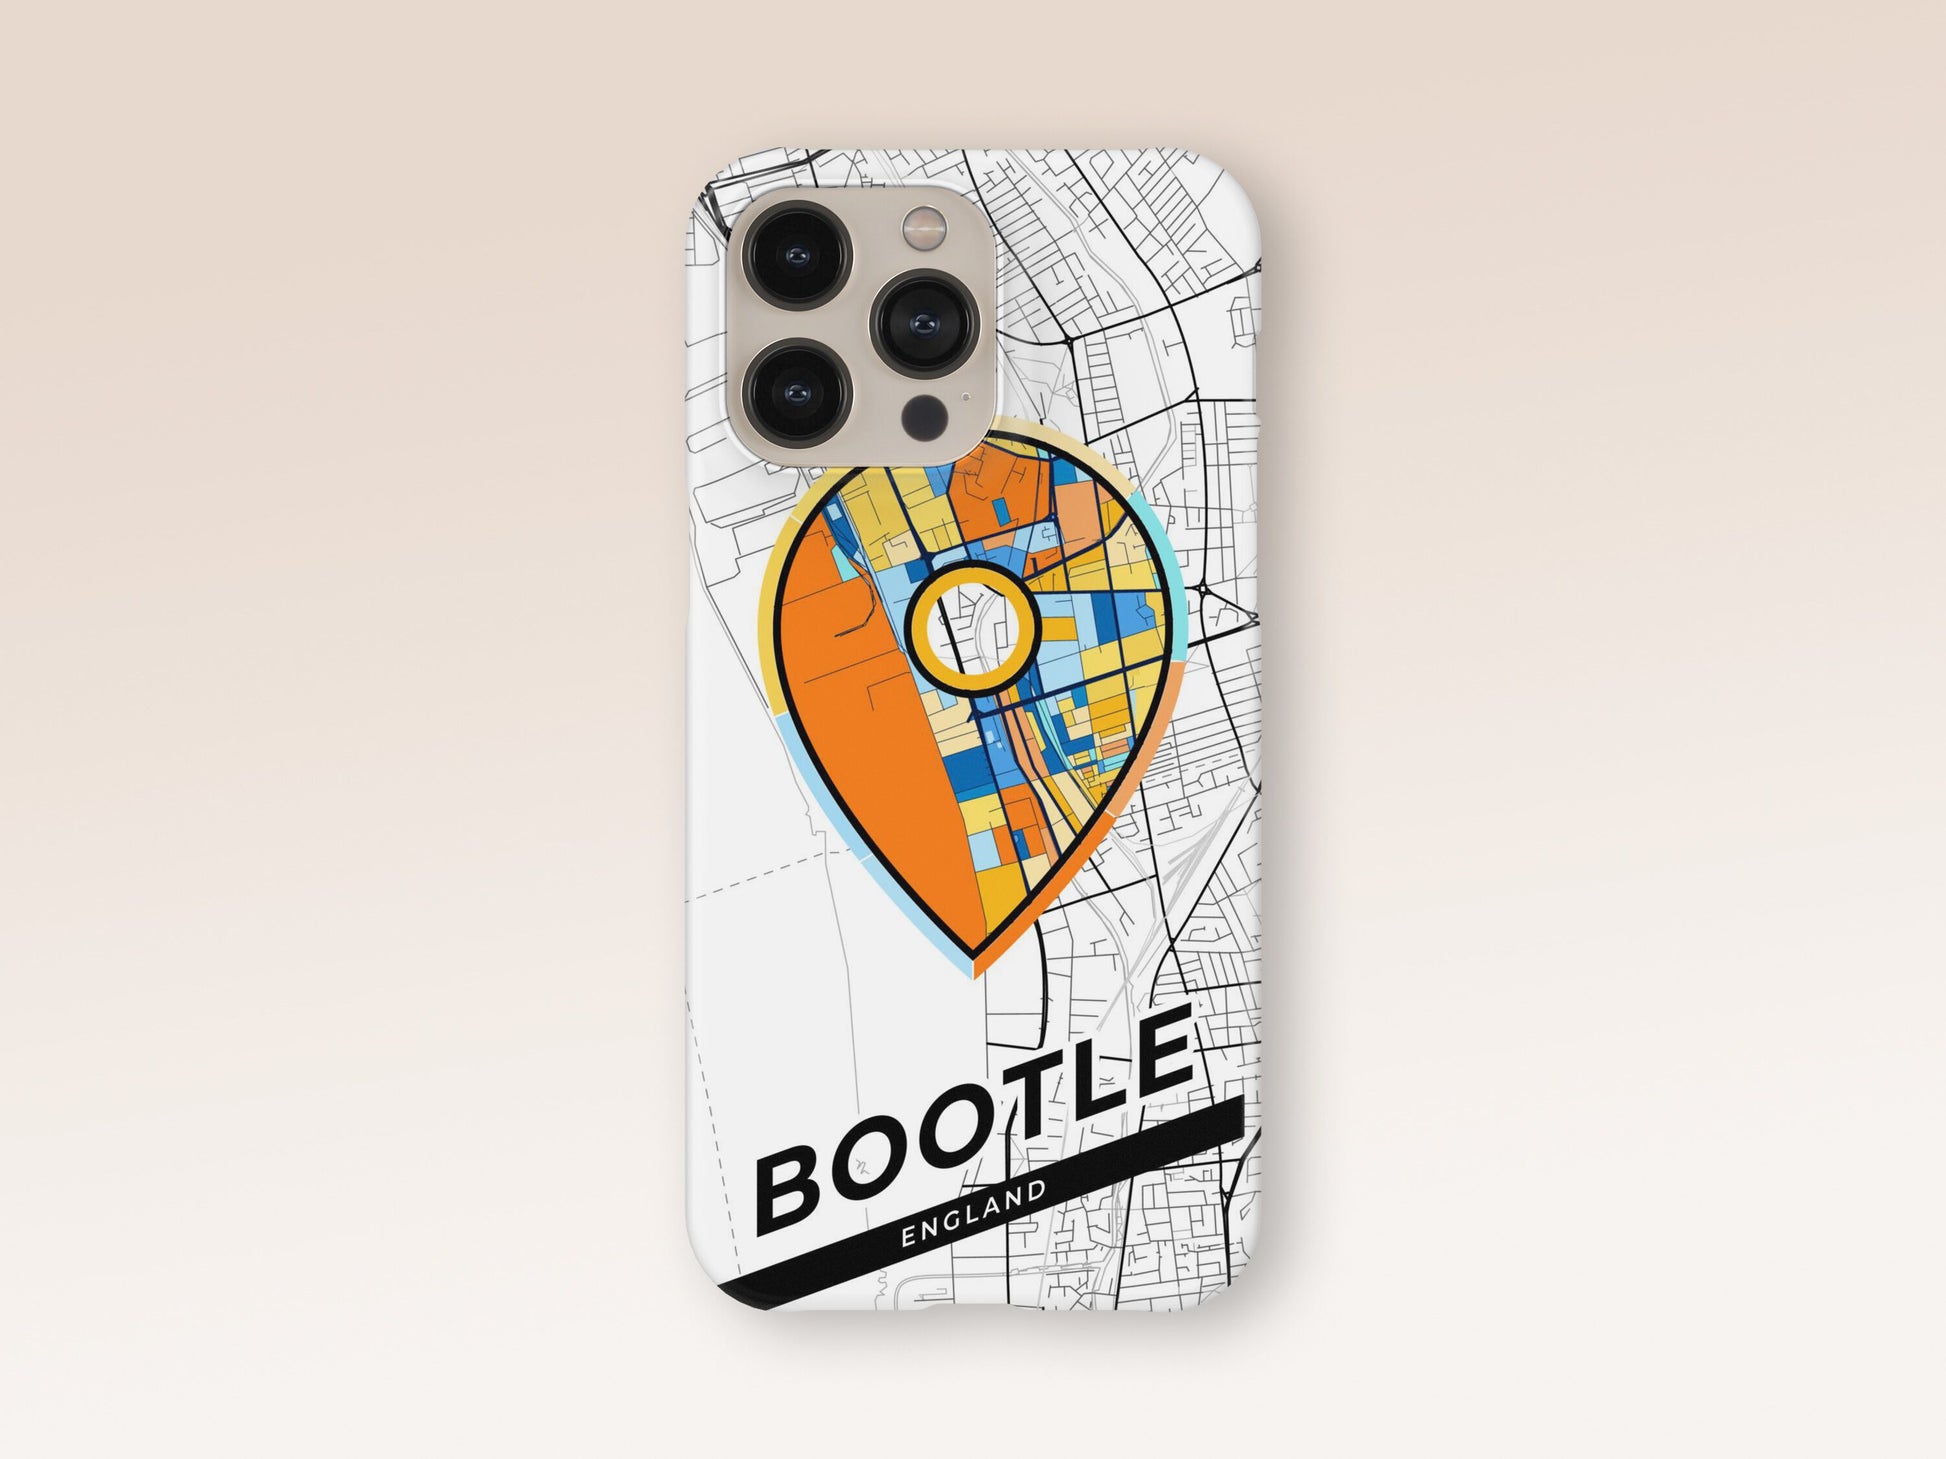 Bootle England slim phone case with colorful icon. Birthday, wedding or housewarming gift. Couple match cases. 1